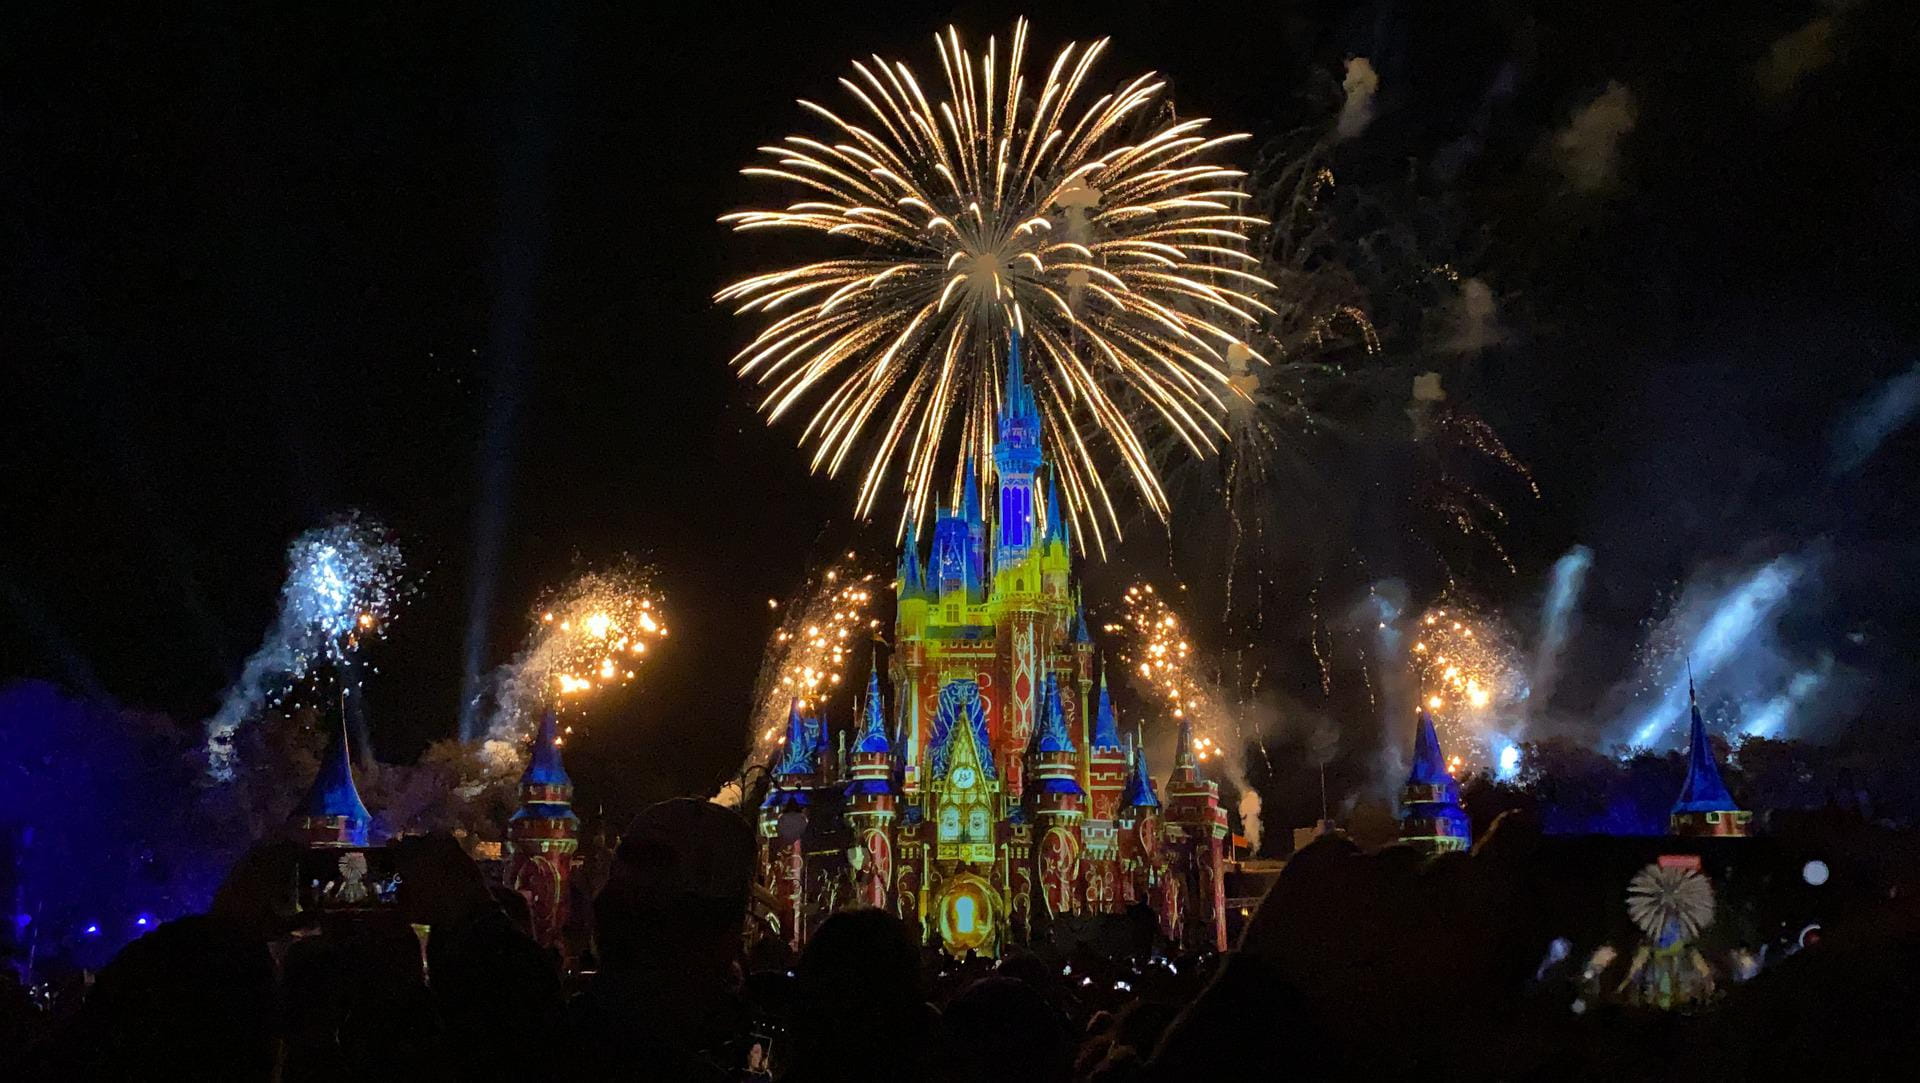 A picture of Disneyland showing fireworks.